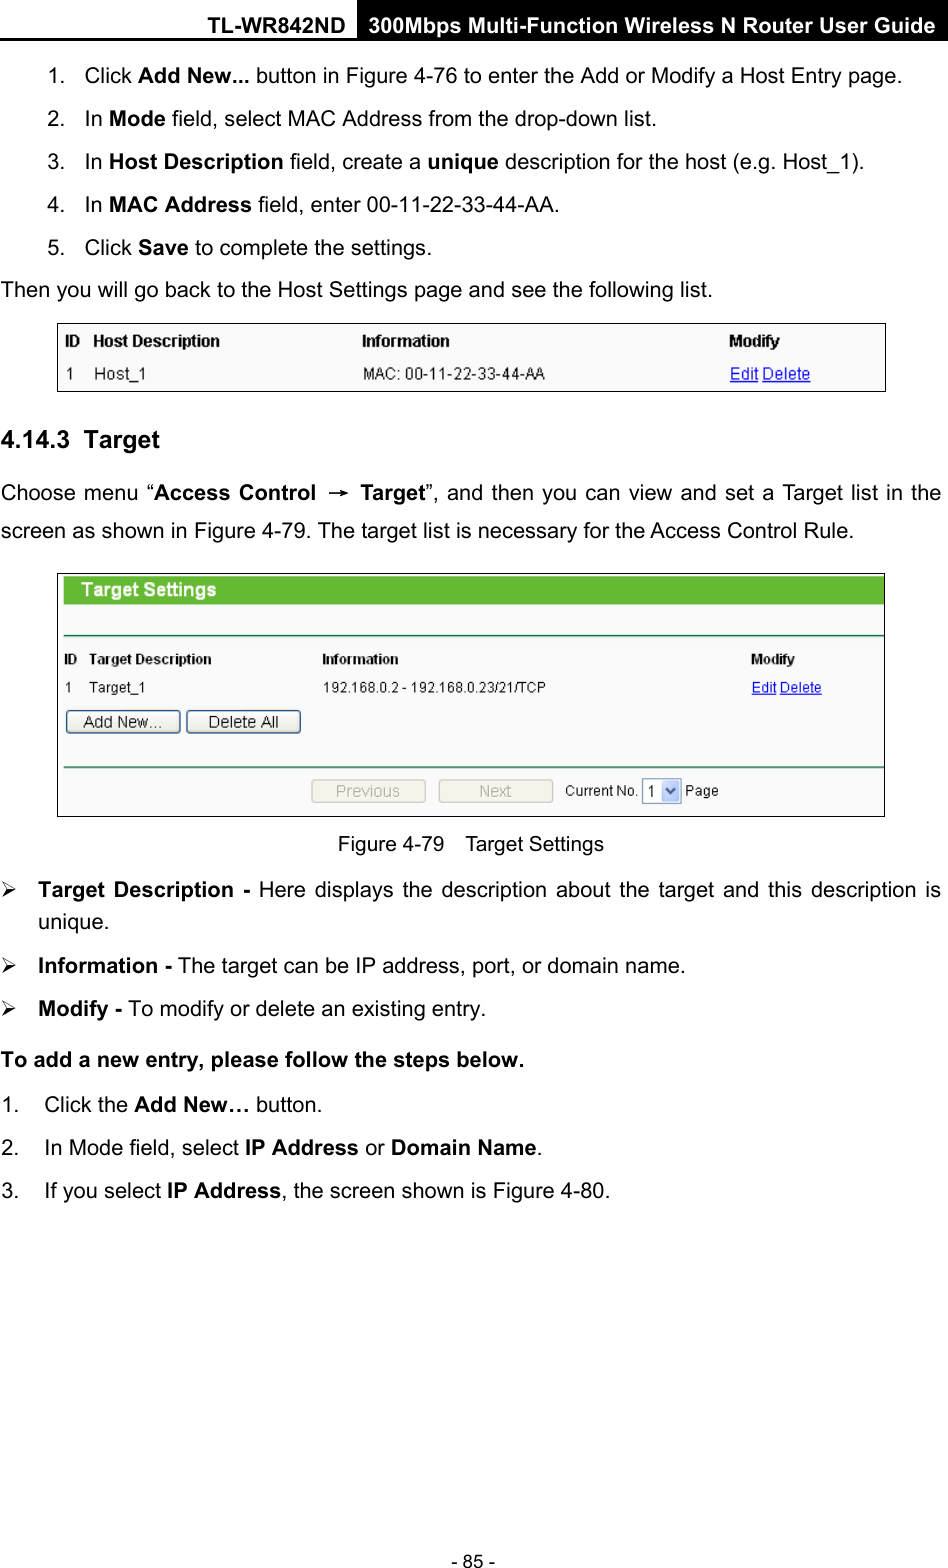 TL-WR842ND 300Mbps Multi-Function Wireless N Router User Guide  - 85 - 1. Click Add New... button in Figure 4-76 to enter the Add or Modify a Host Entry page.   2. In Mode field, select MAC Address from the drop-down list.   3. In Host Description field, create a unique description for the host (e.g. Host_1).   4. In MAC Address field, enter 00-11-22-33-44-AA.   5. Click Save to complete the settings.   Then you will go back to the Host Settings page and see the following list.  4.14.3  Target Choose menu “Access Control → Target”, and then you can view and set a Target list in the screen as shown in Figure 4-79. The target list is necessary for the Access Control Rule.  Figure 4-79  Target Settings  Target Description  - Here displays the description about the target and this description is unique.    Information - The target can be IP address, port, or domain name.    Modify - To modify or delete an existing entry.   To add a new entry, please follow the steps below. 1.  Click the Add New… button. 2. In Mode field, select IP Address or Domain Name. 3.  If you select IP Address, the screen shown is Figure 4-80.   